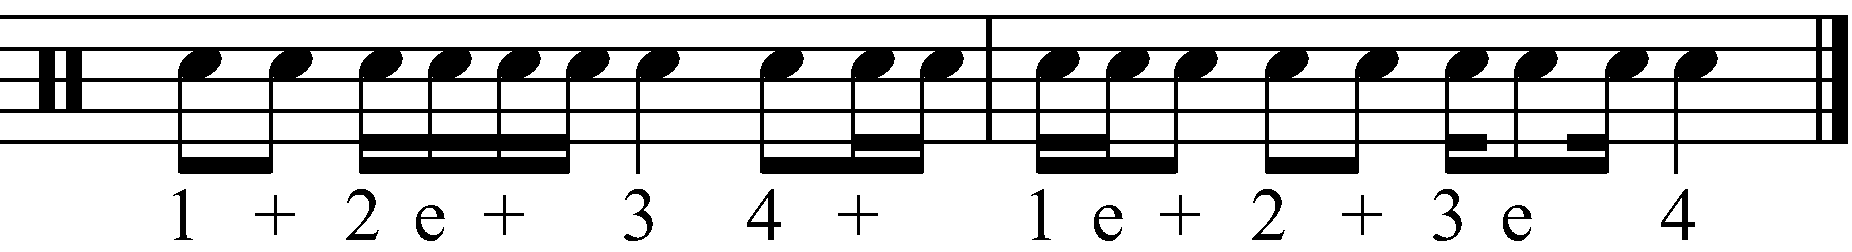 A snare drum rhythm with '+' counts added.